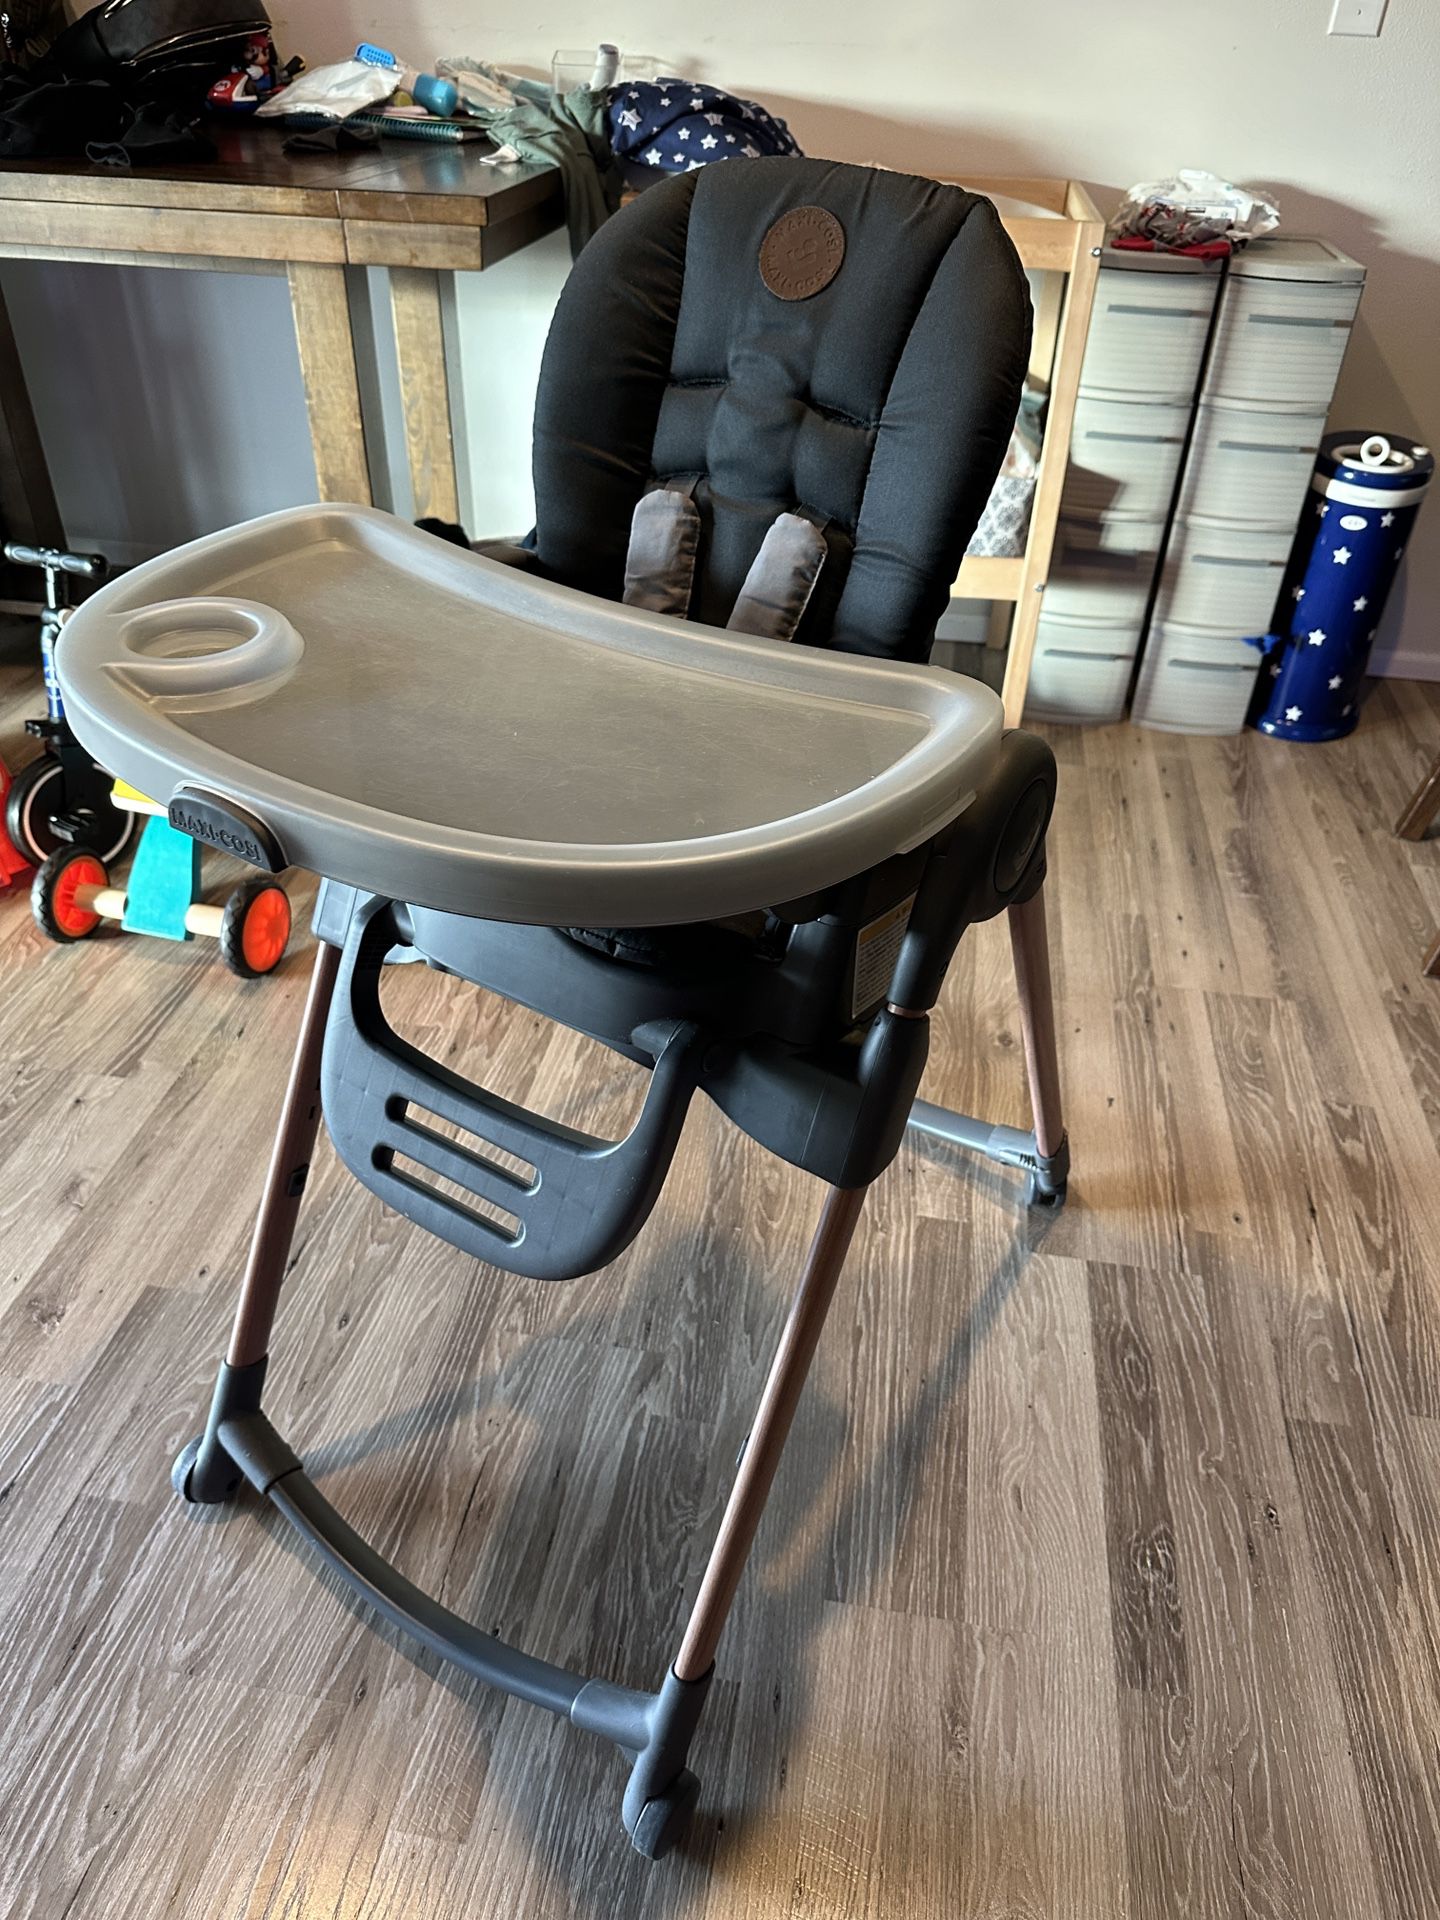 Maxi cosi 6 in 1 Minla high chair ( cash only)